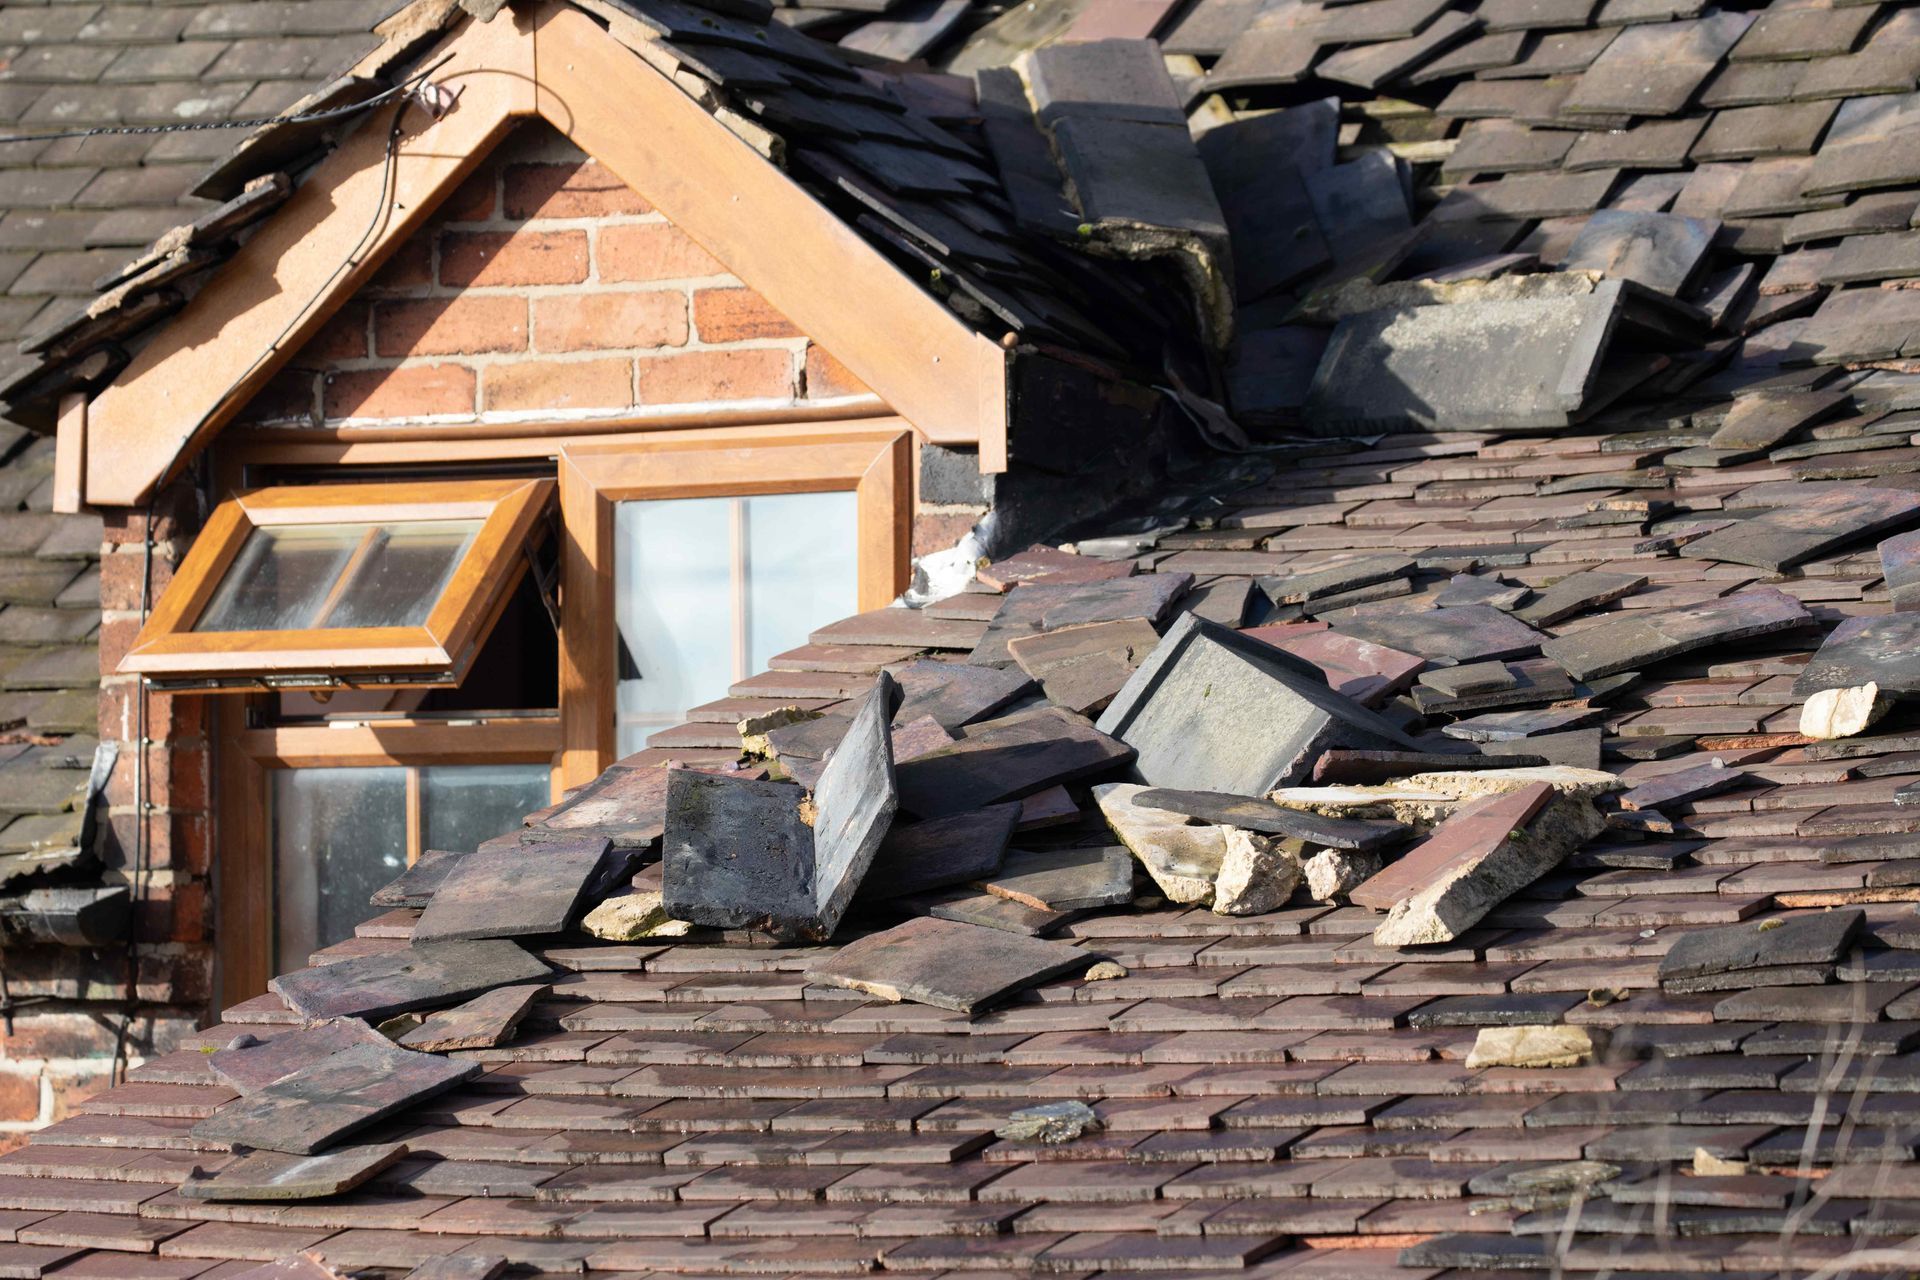 A deteriorating roof sits in disrepair cluttered with broken shingles and all other forms of debris.